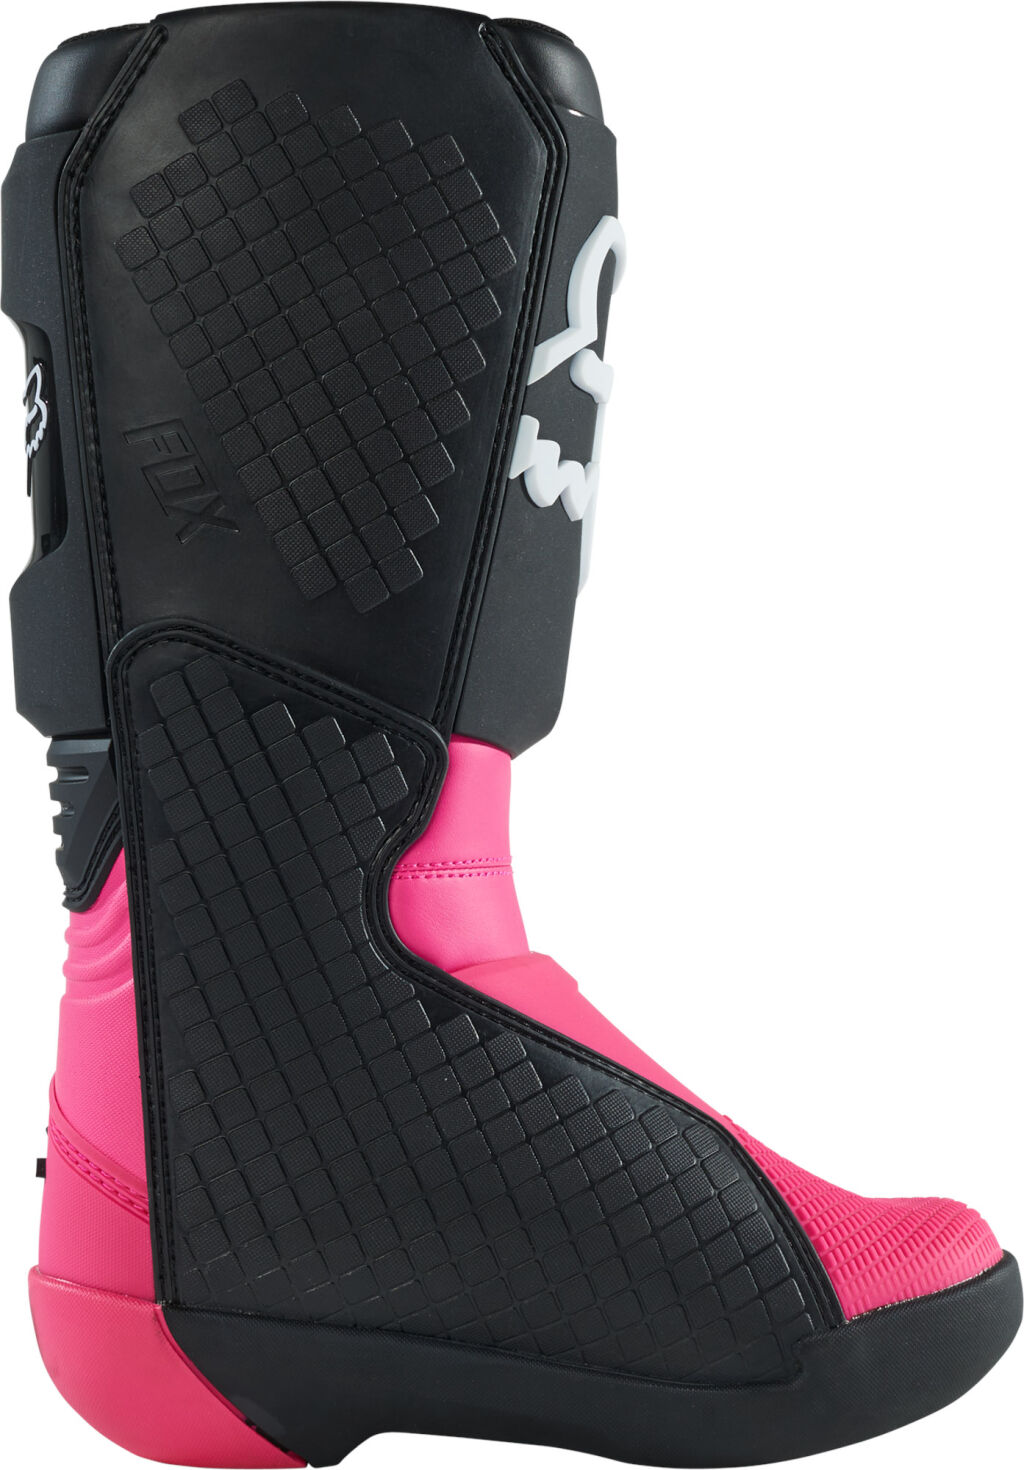 FOX RACING YOUTH COMP BOOT BLACK/PINK